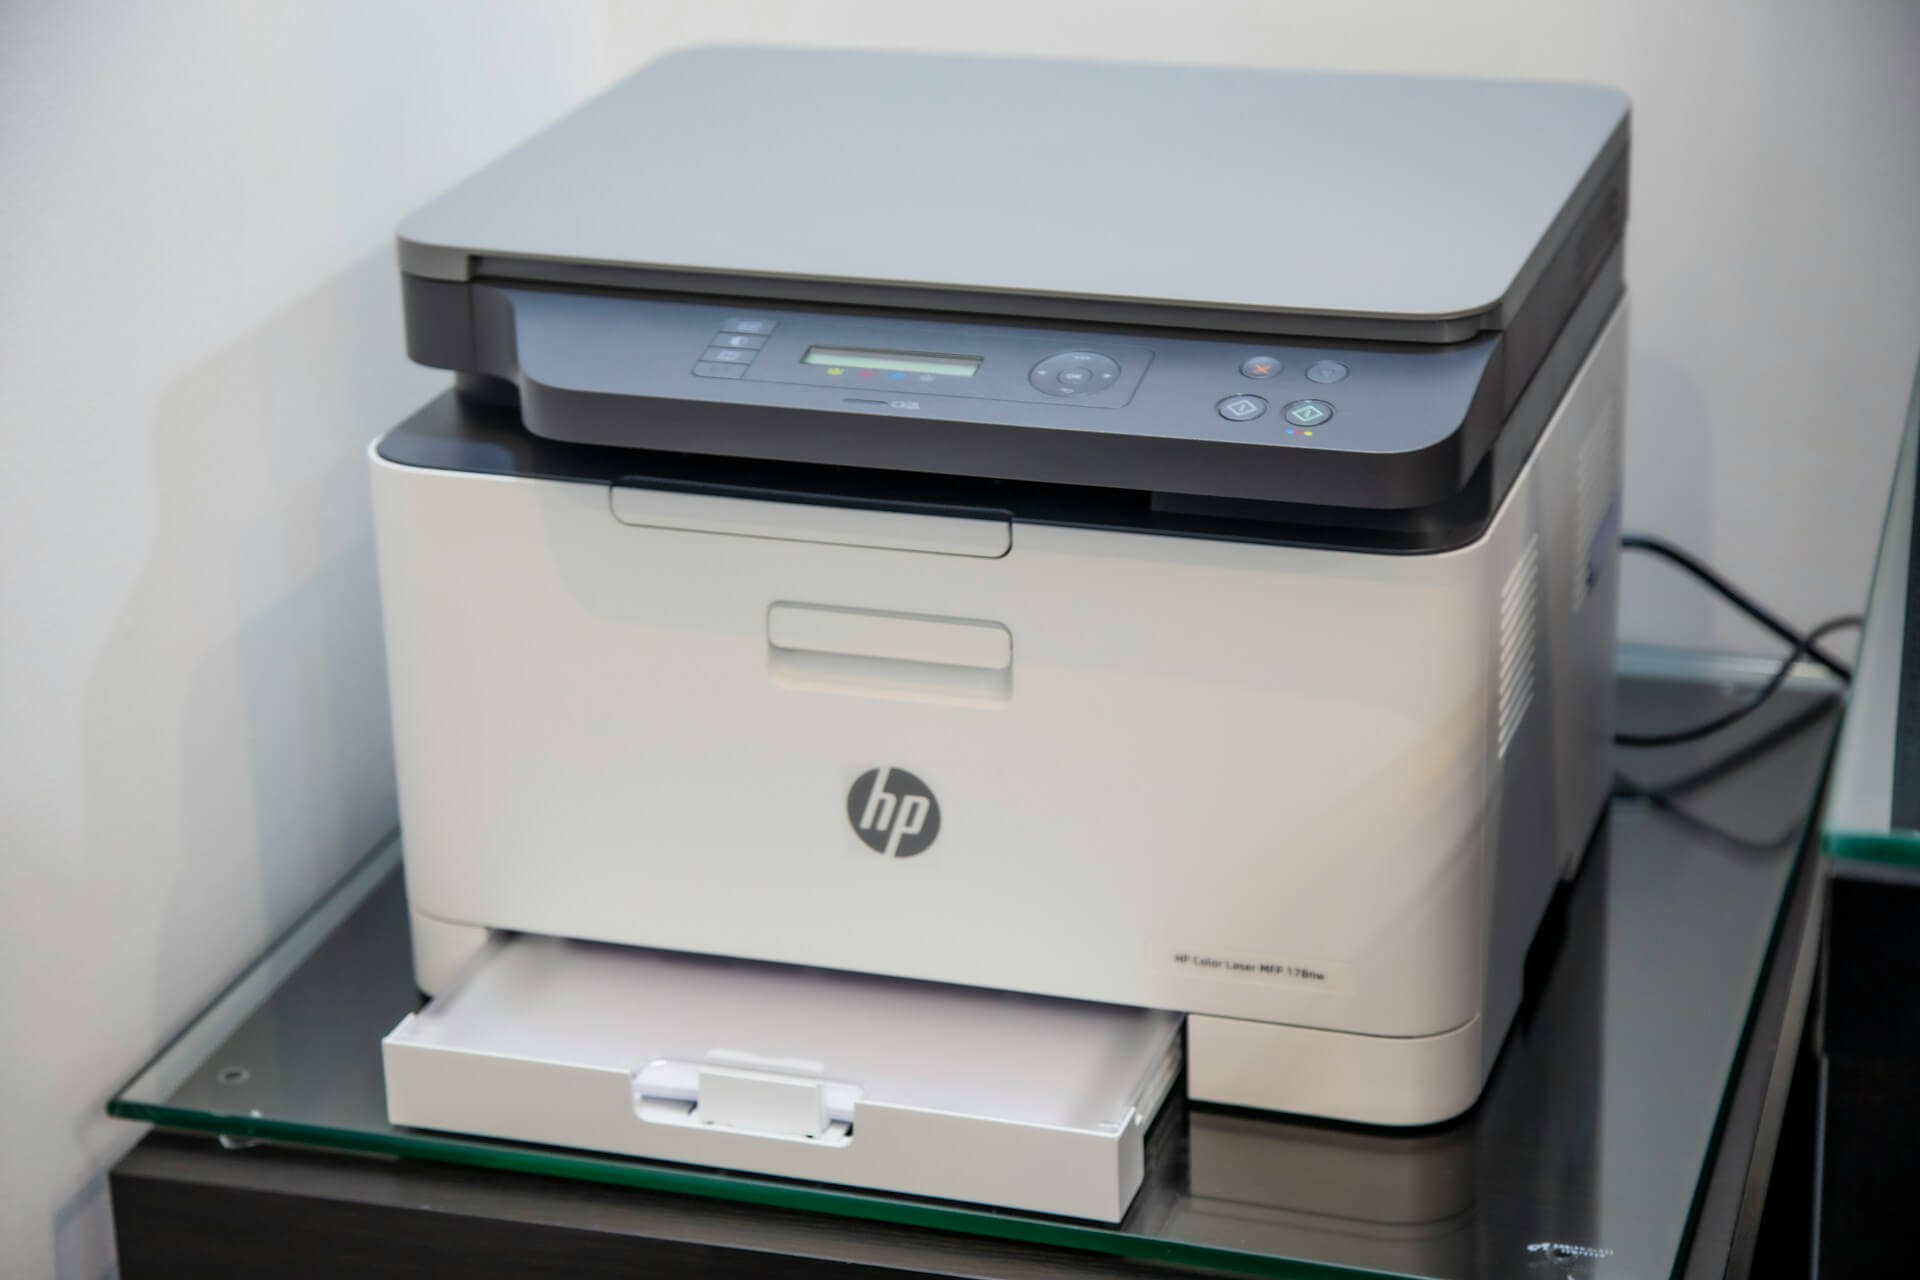 How to Set up Fax on a Printer?